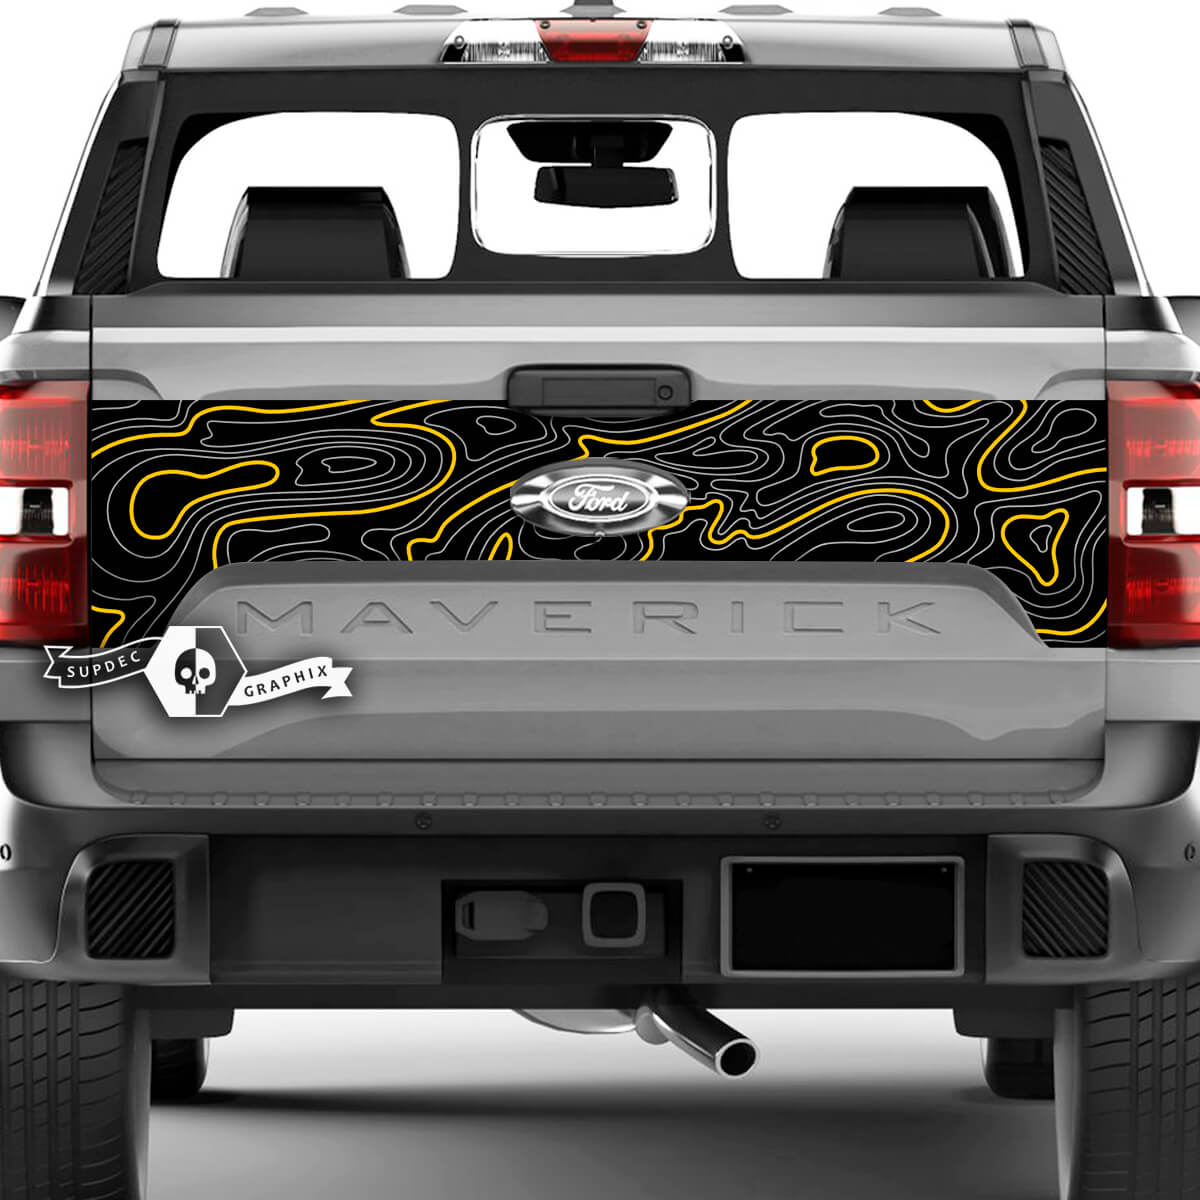 Ford F-150 XLT Maverick Tailgate Splash Topographic Map Graphics Side Decals Stickers 2 Colors
